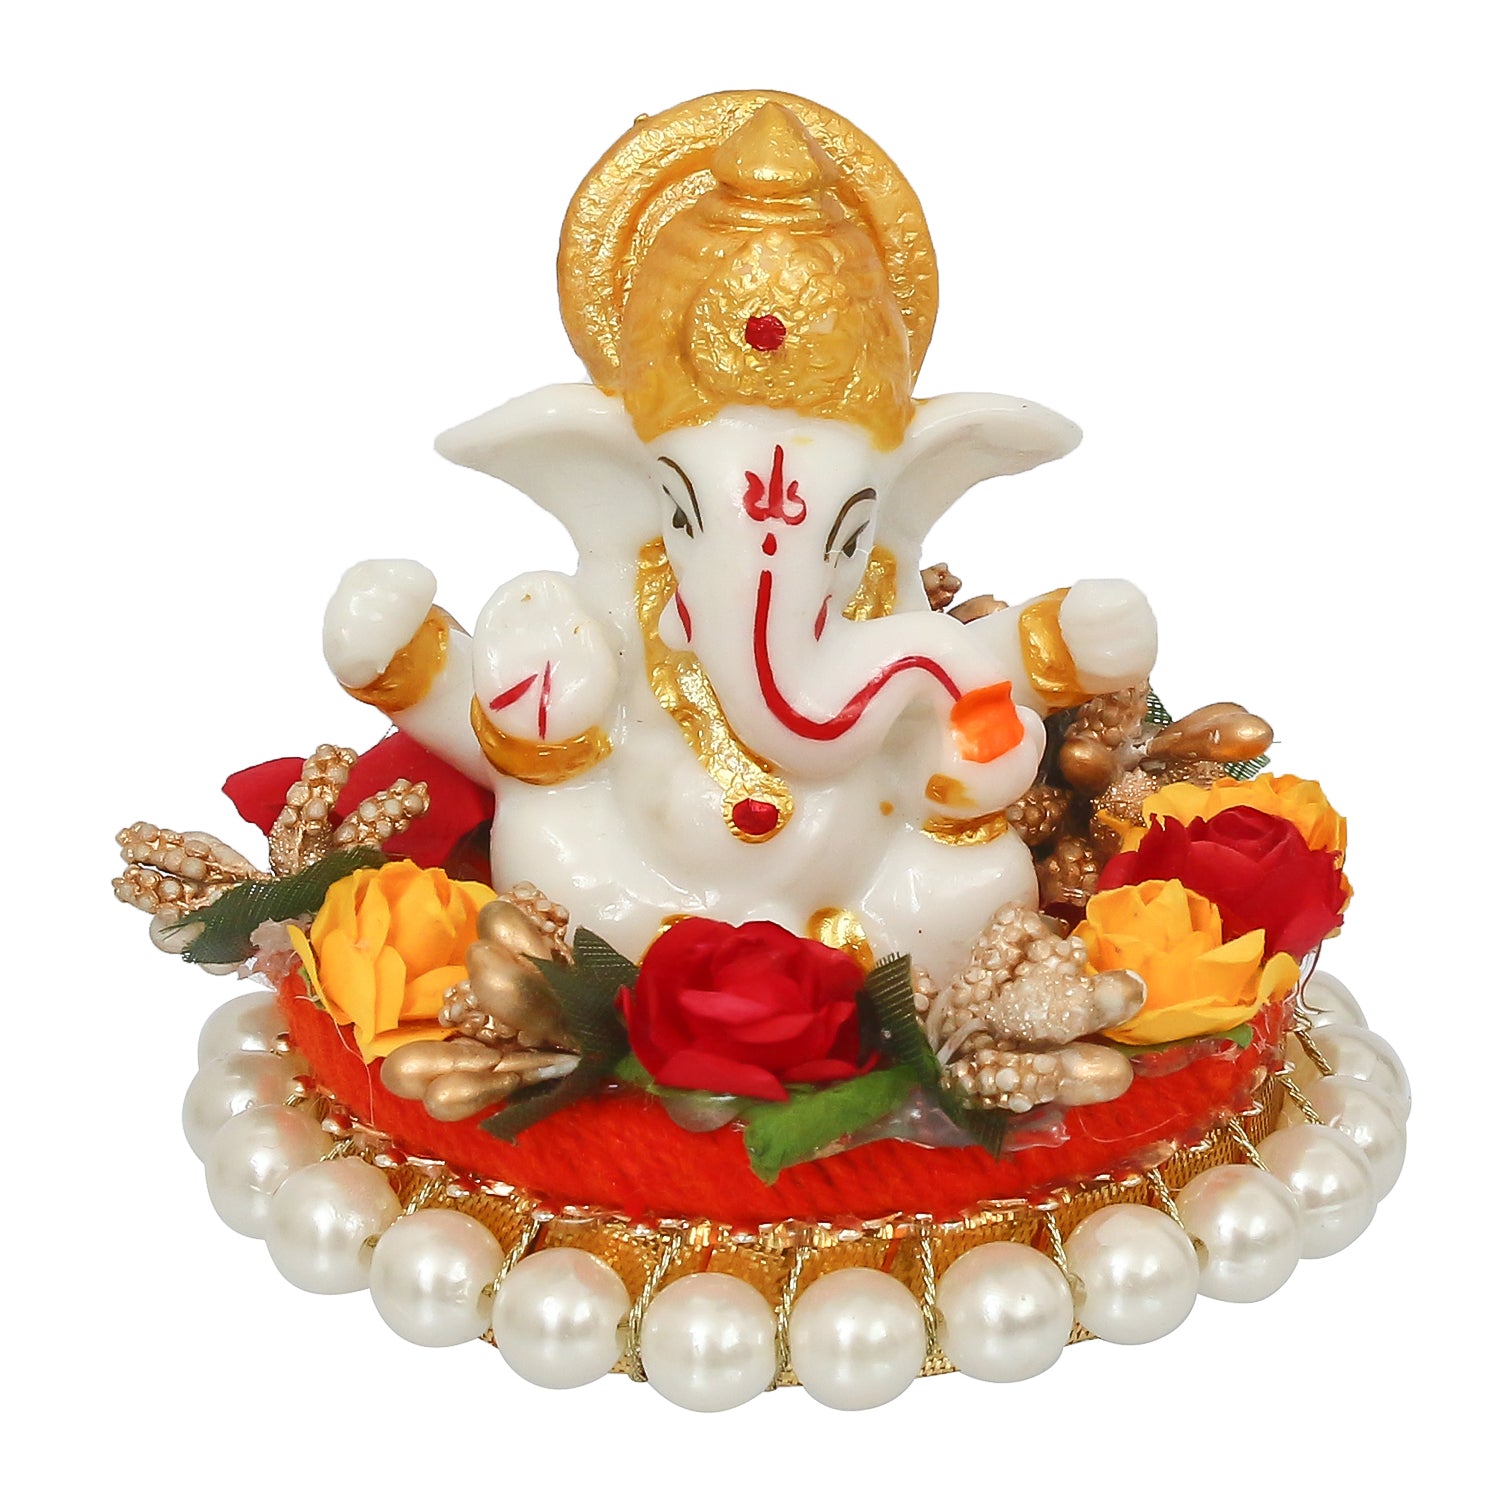 Polyresin Lord Ganesha Statue on Decorative Handcrafted Plate for Home, Office and Car Dashboard 4